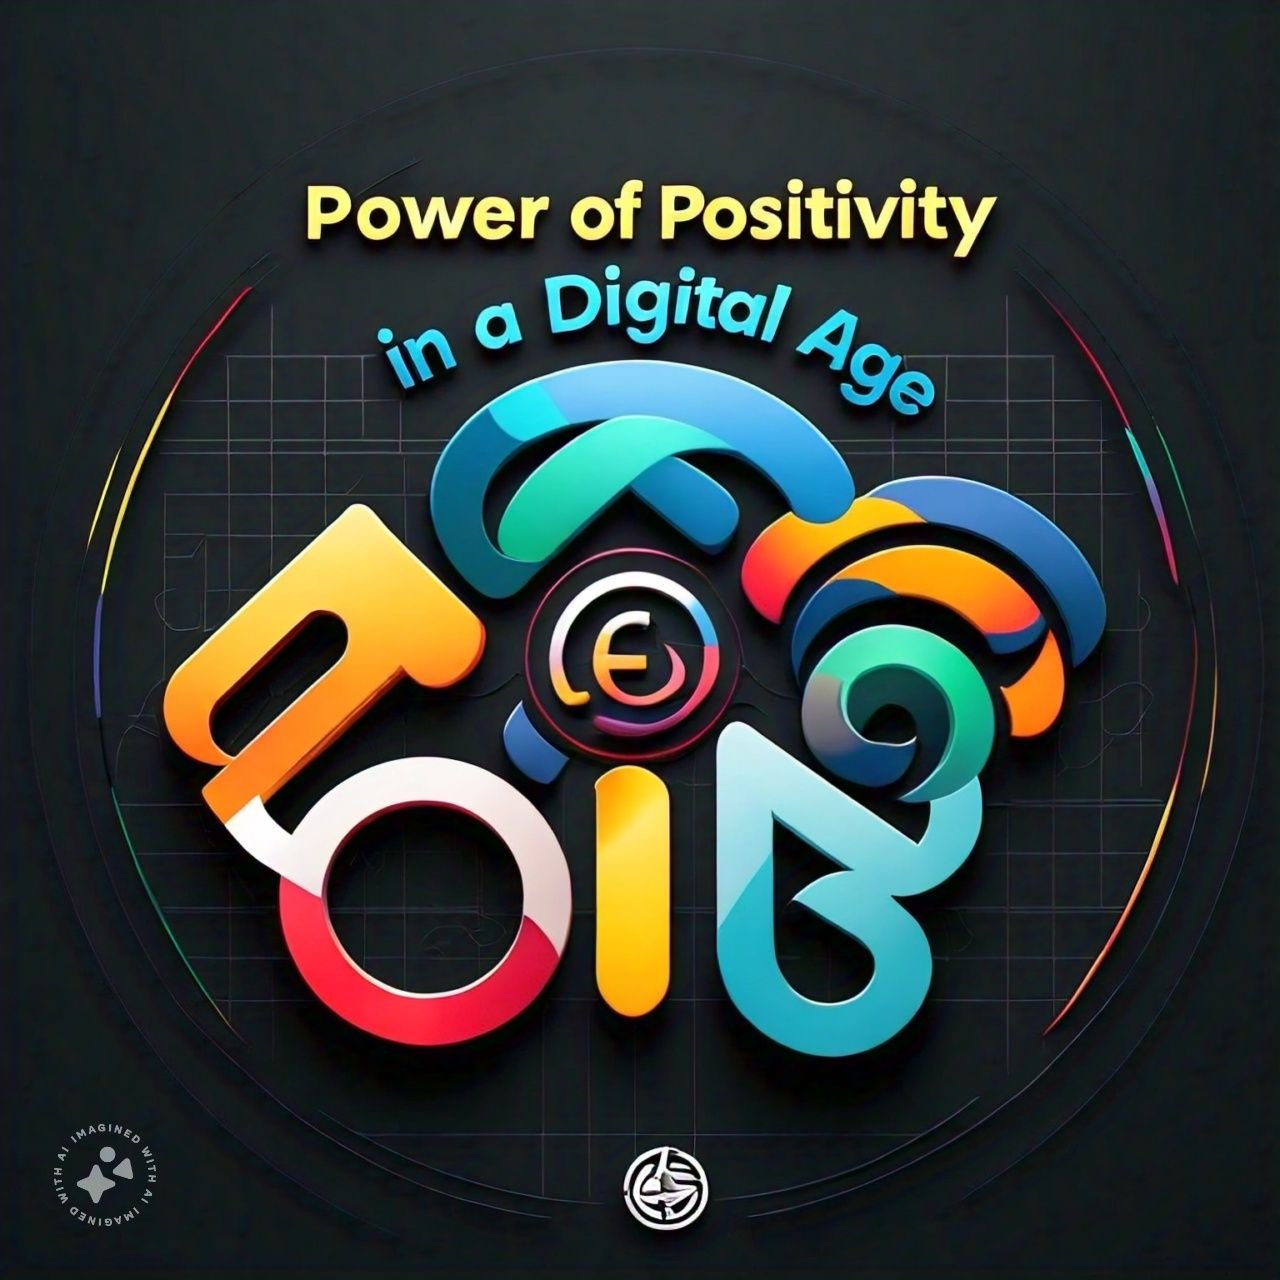 Power of Positivity in a Digital Age